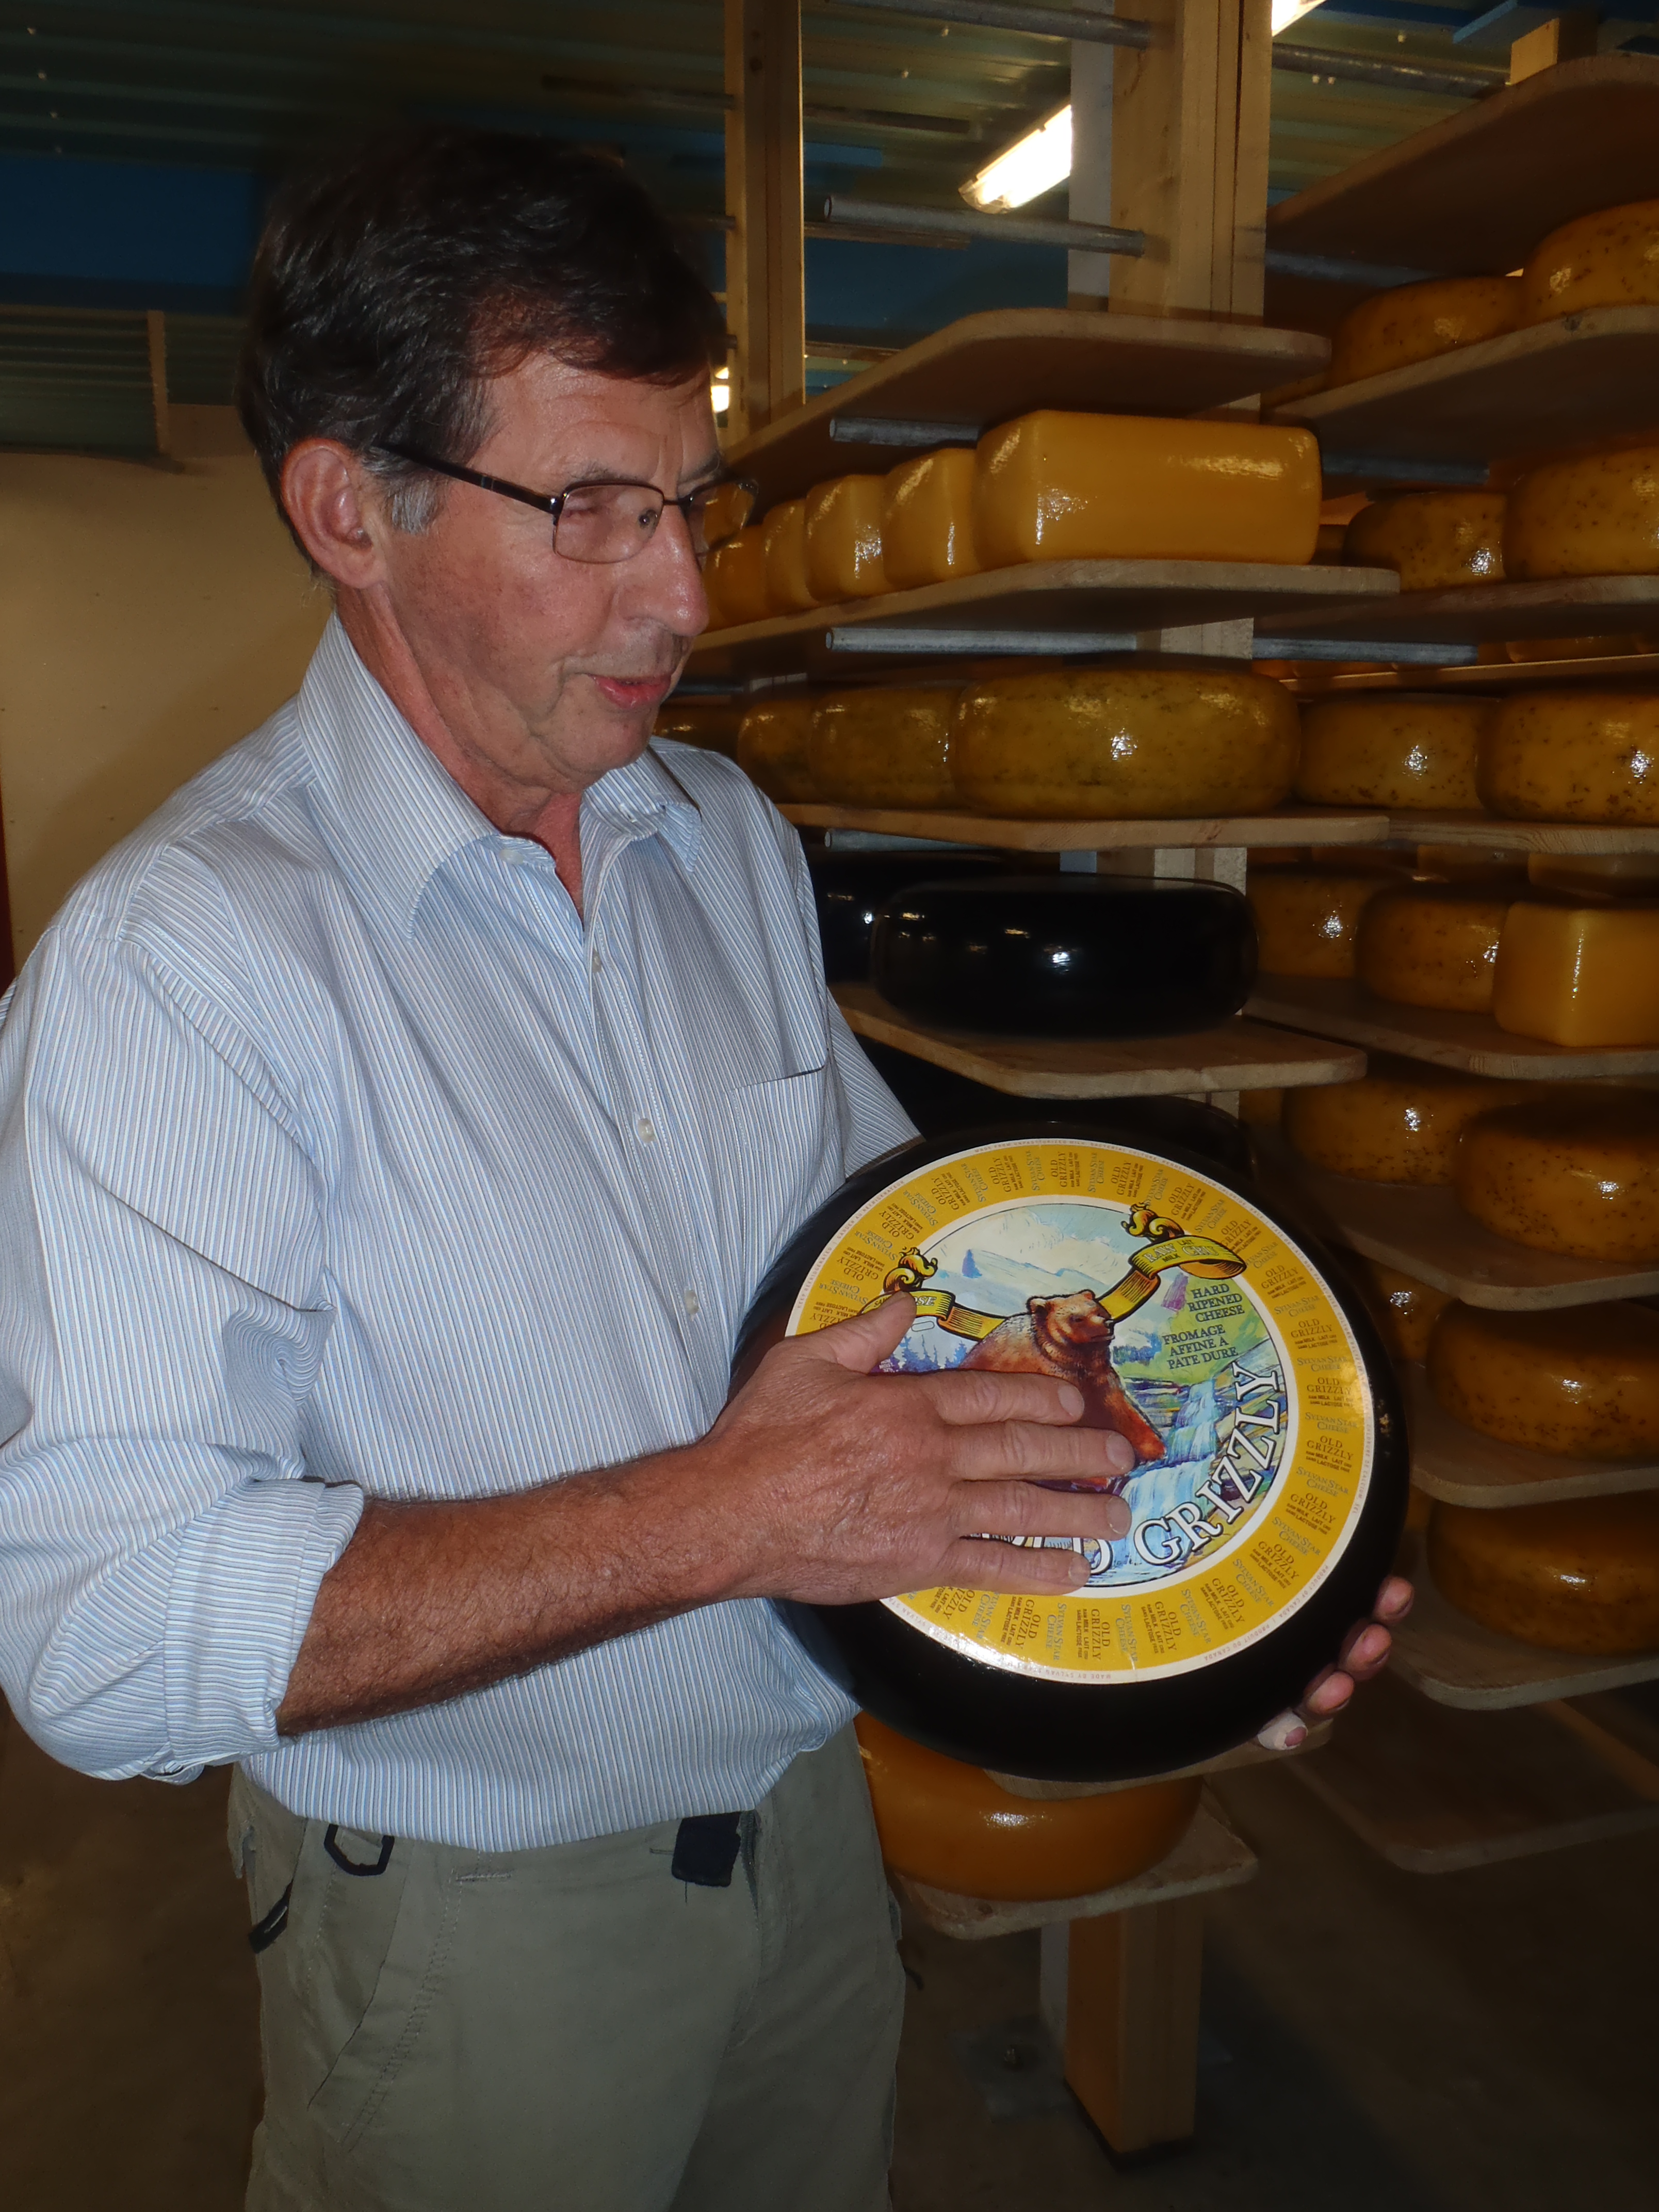 Sylvan Star owner Jan with a wheel of Grizzly aged gouda